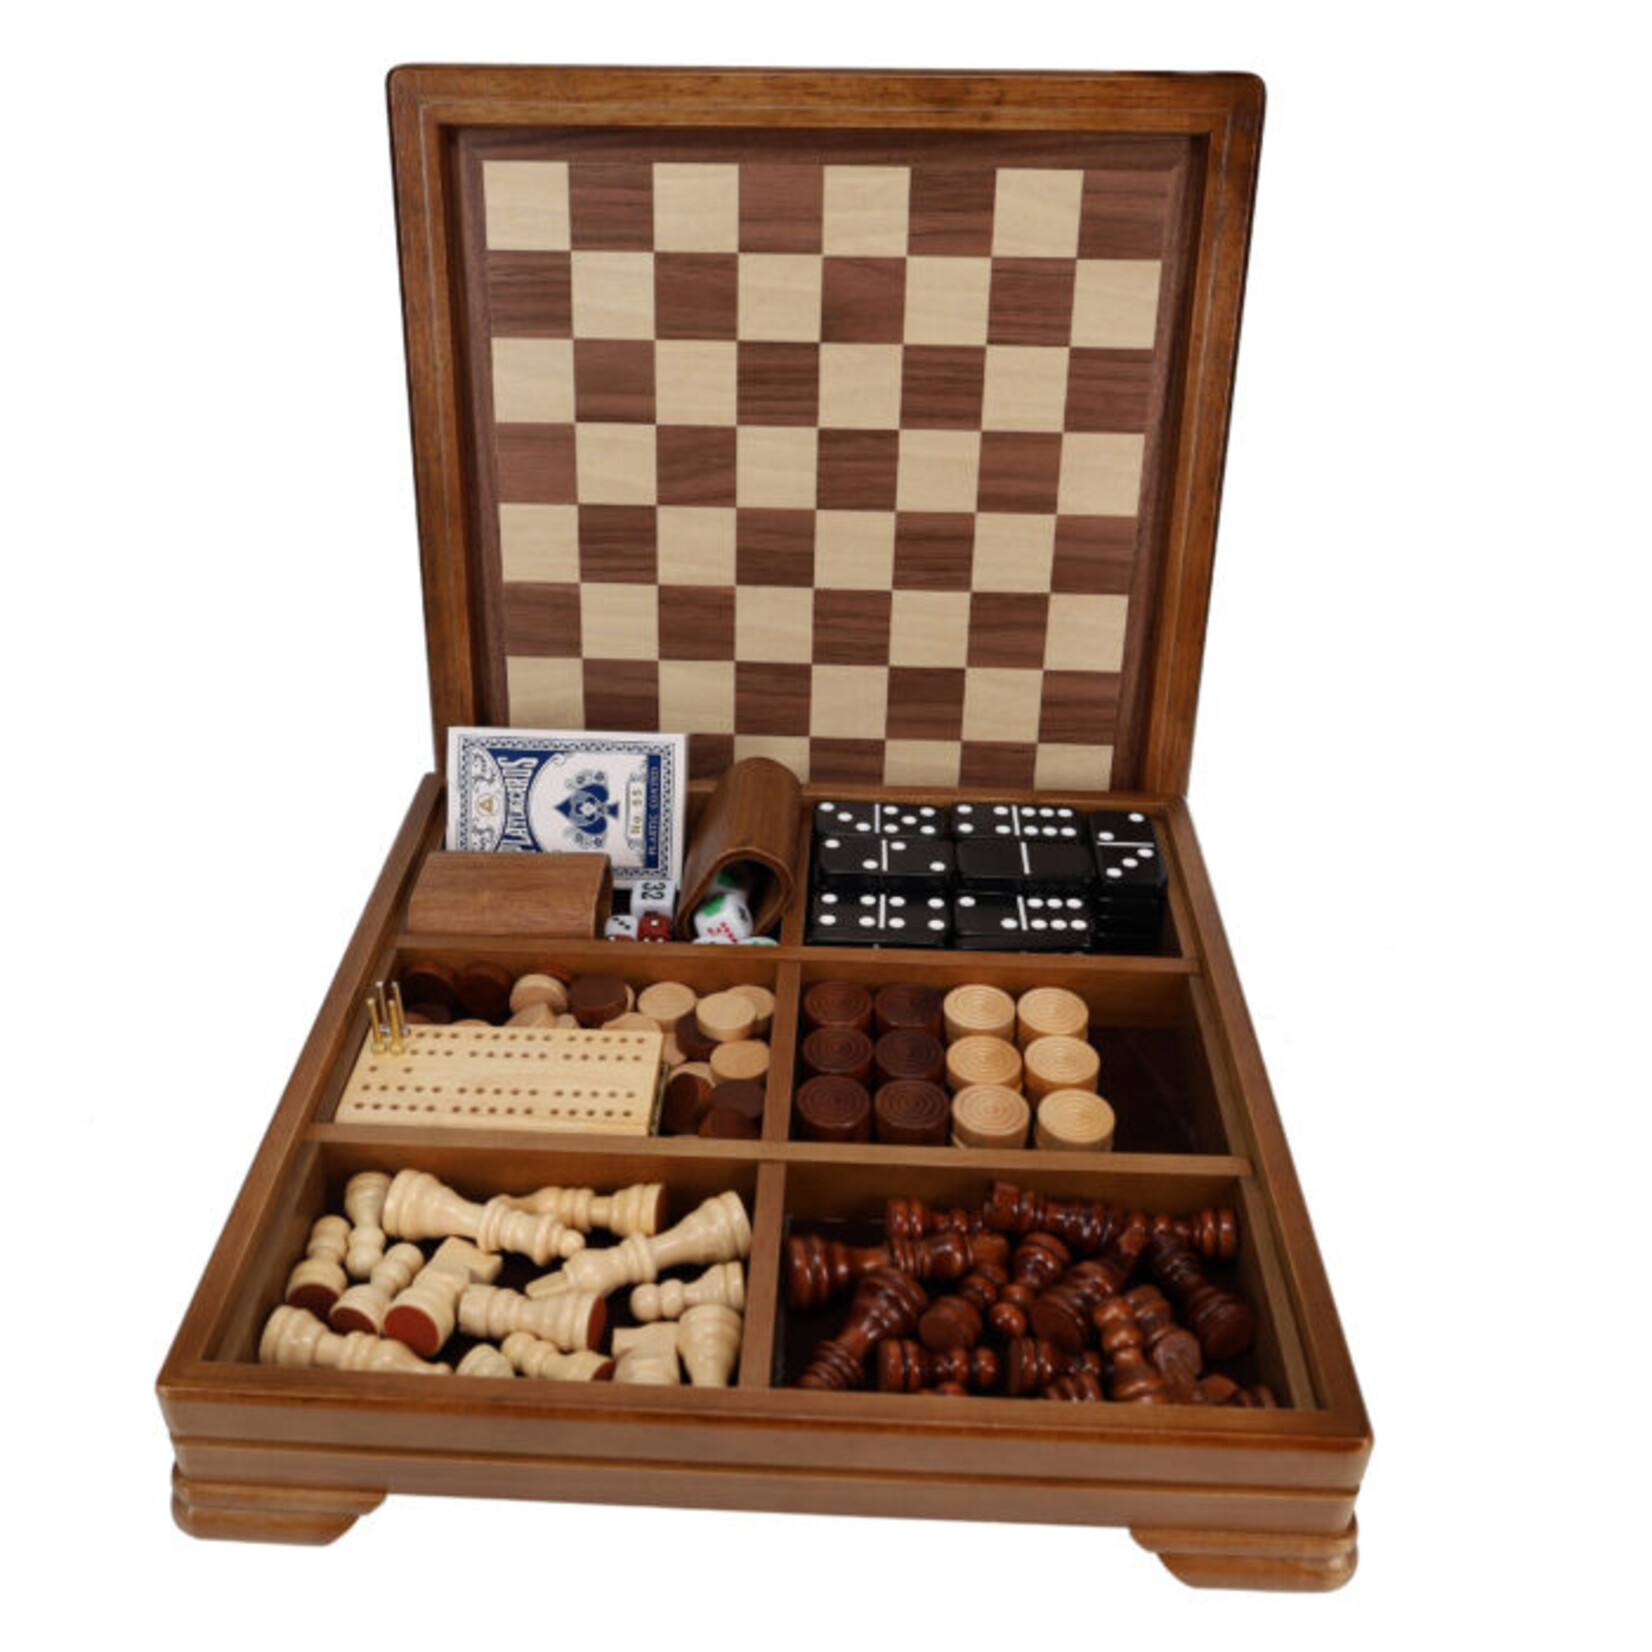 Wood Expressions 7-Games-in-1 Game Set (Walnut)